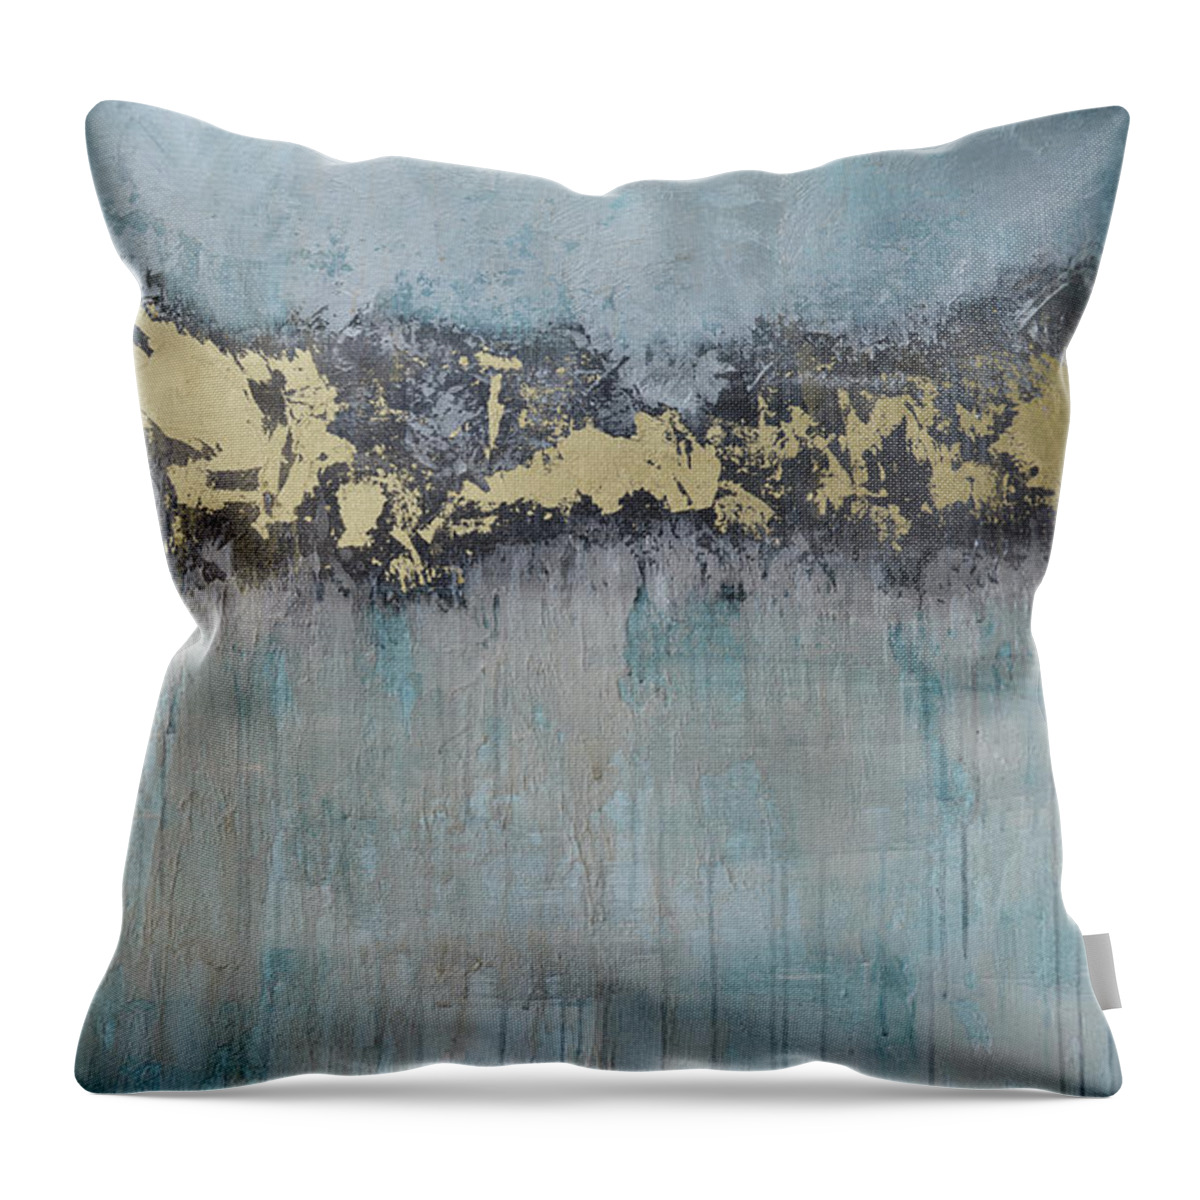 Blue Throw Pillow featuring the painting Abstract No. 2 by Shadia Derbyshire